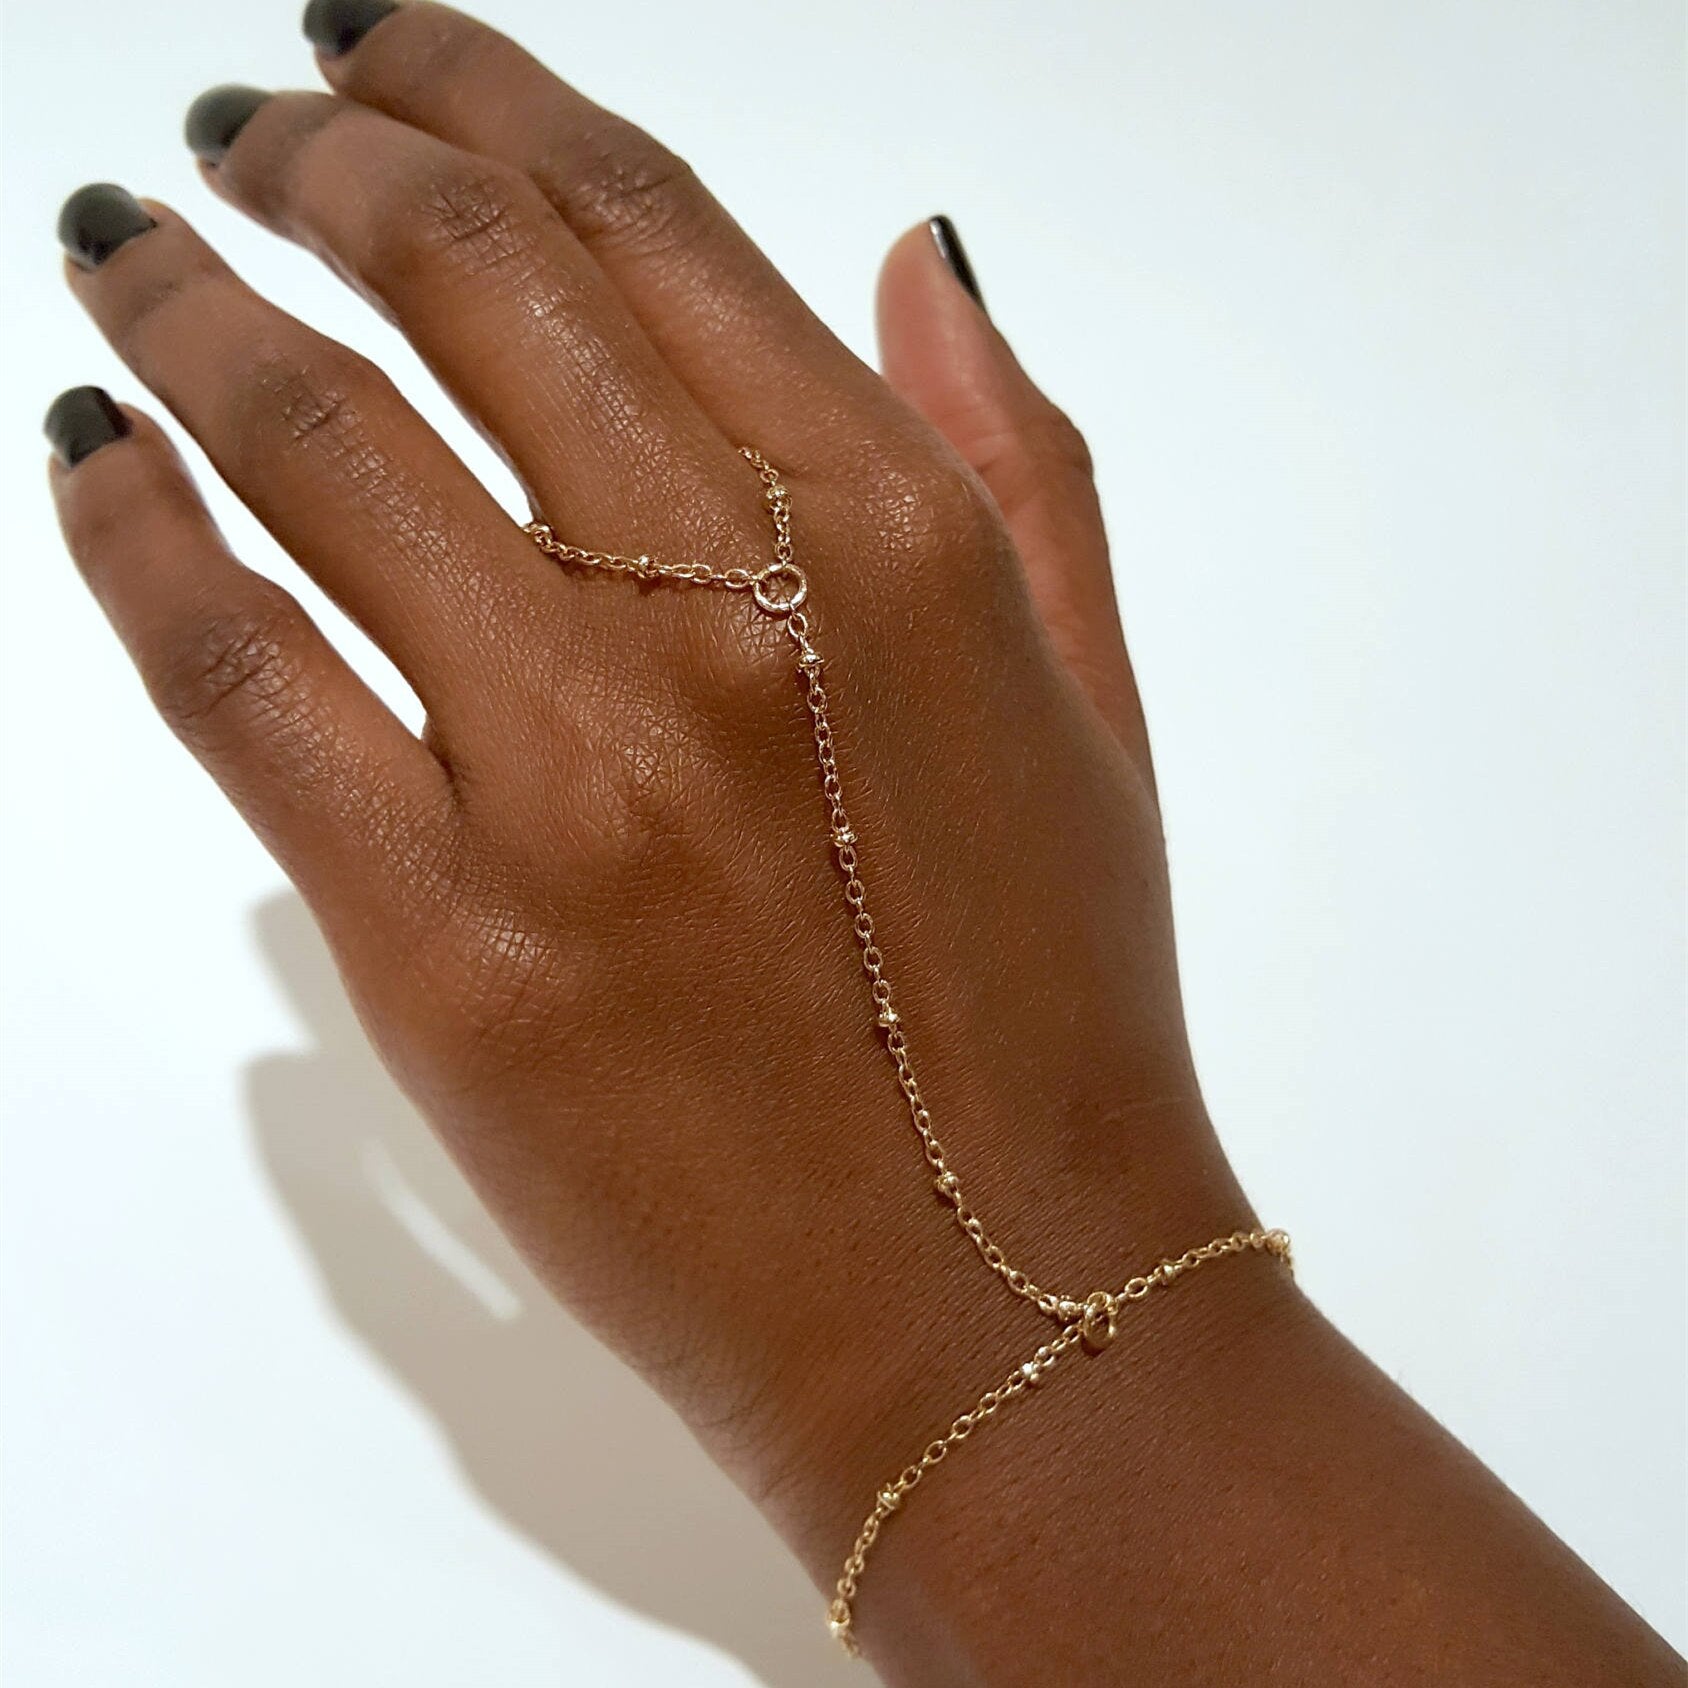 Minimalist Gold plated Bead Chain Ring Bracelet Linked Finger Bracelet and  Ring Connected Hand Harness Bracelets